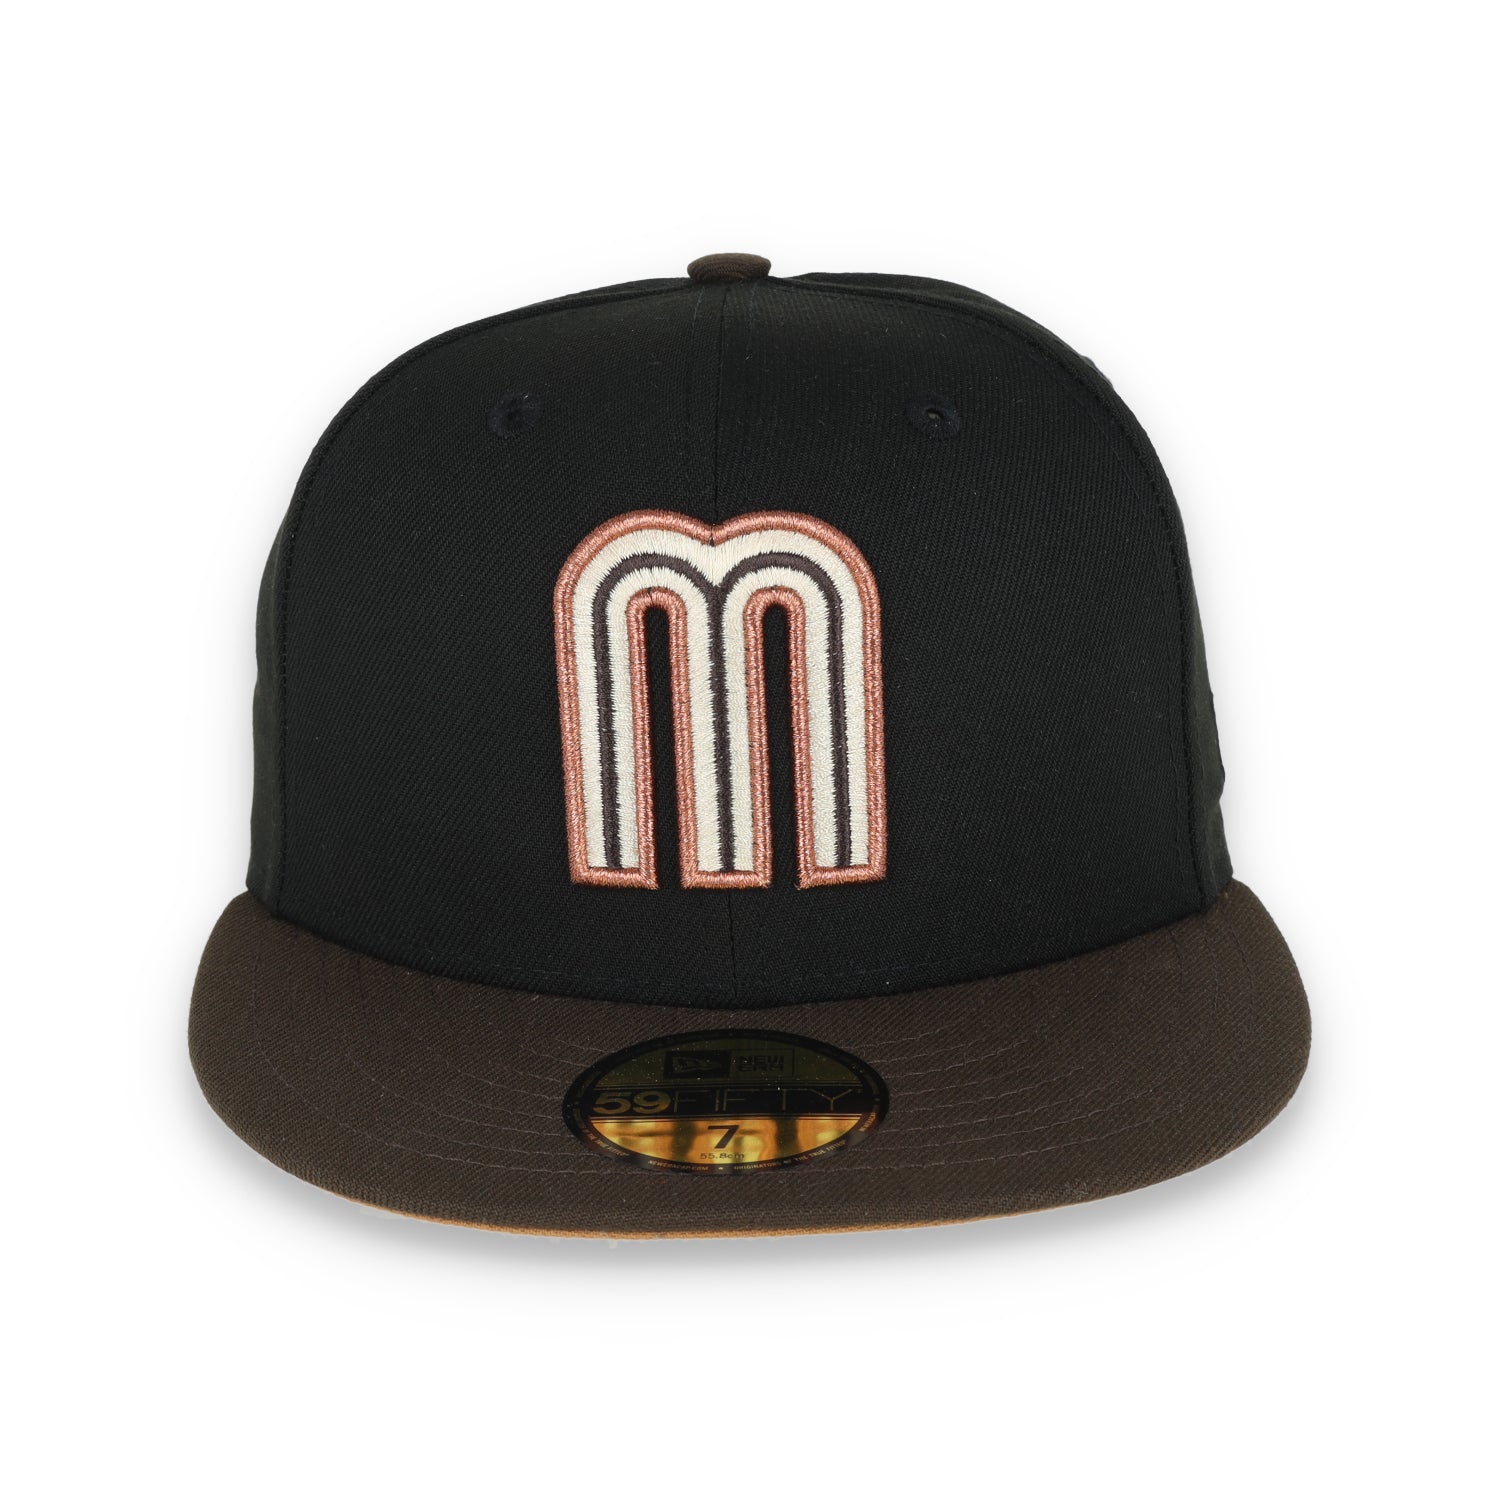 NEW ERA OFFICIAL MEXICO FLAG 59FIFTY FITTED HAT-BLK/WALNUT